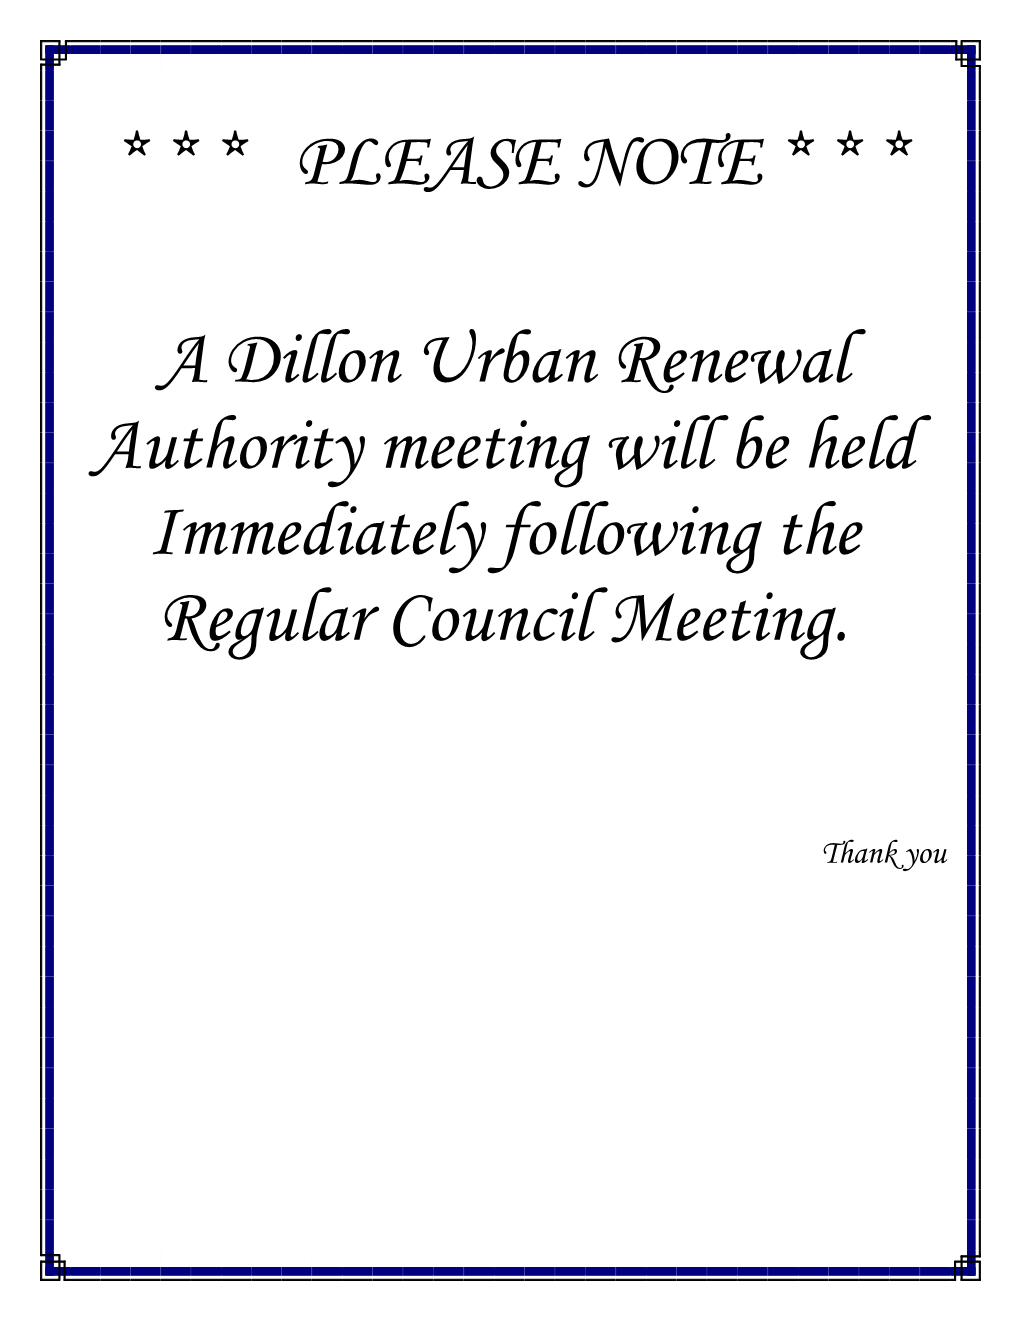 PLEASE NOTE * * * a Dillon Urban Renewal Authority Meeting Will Be